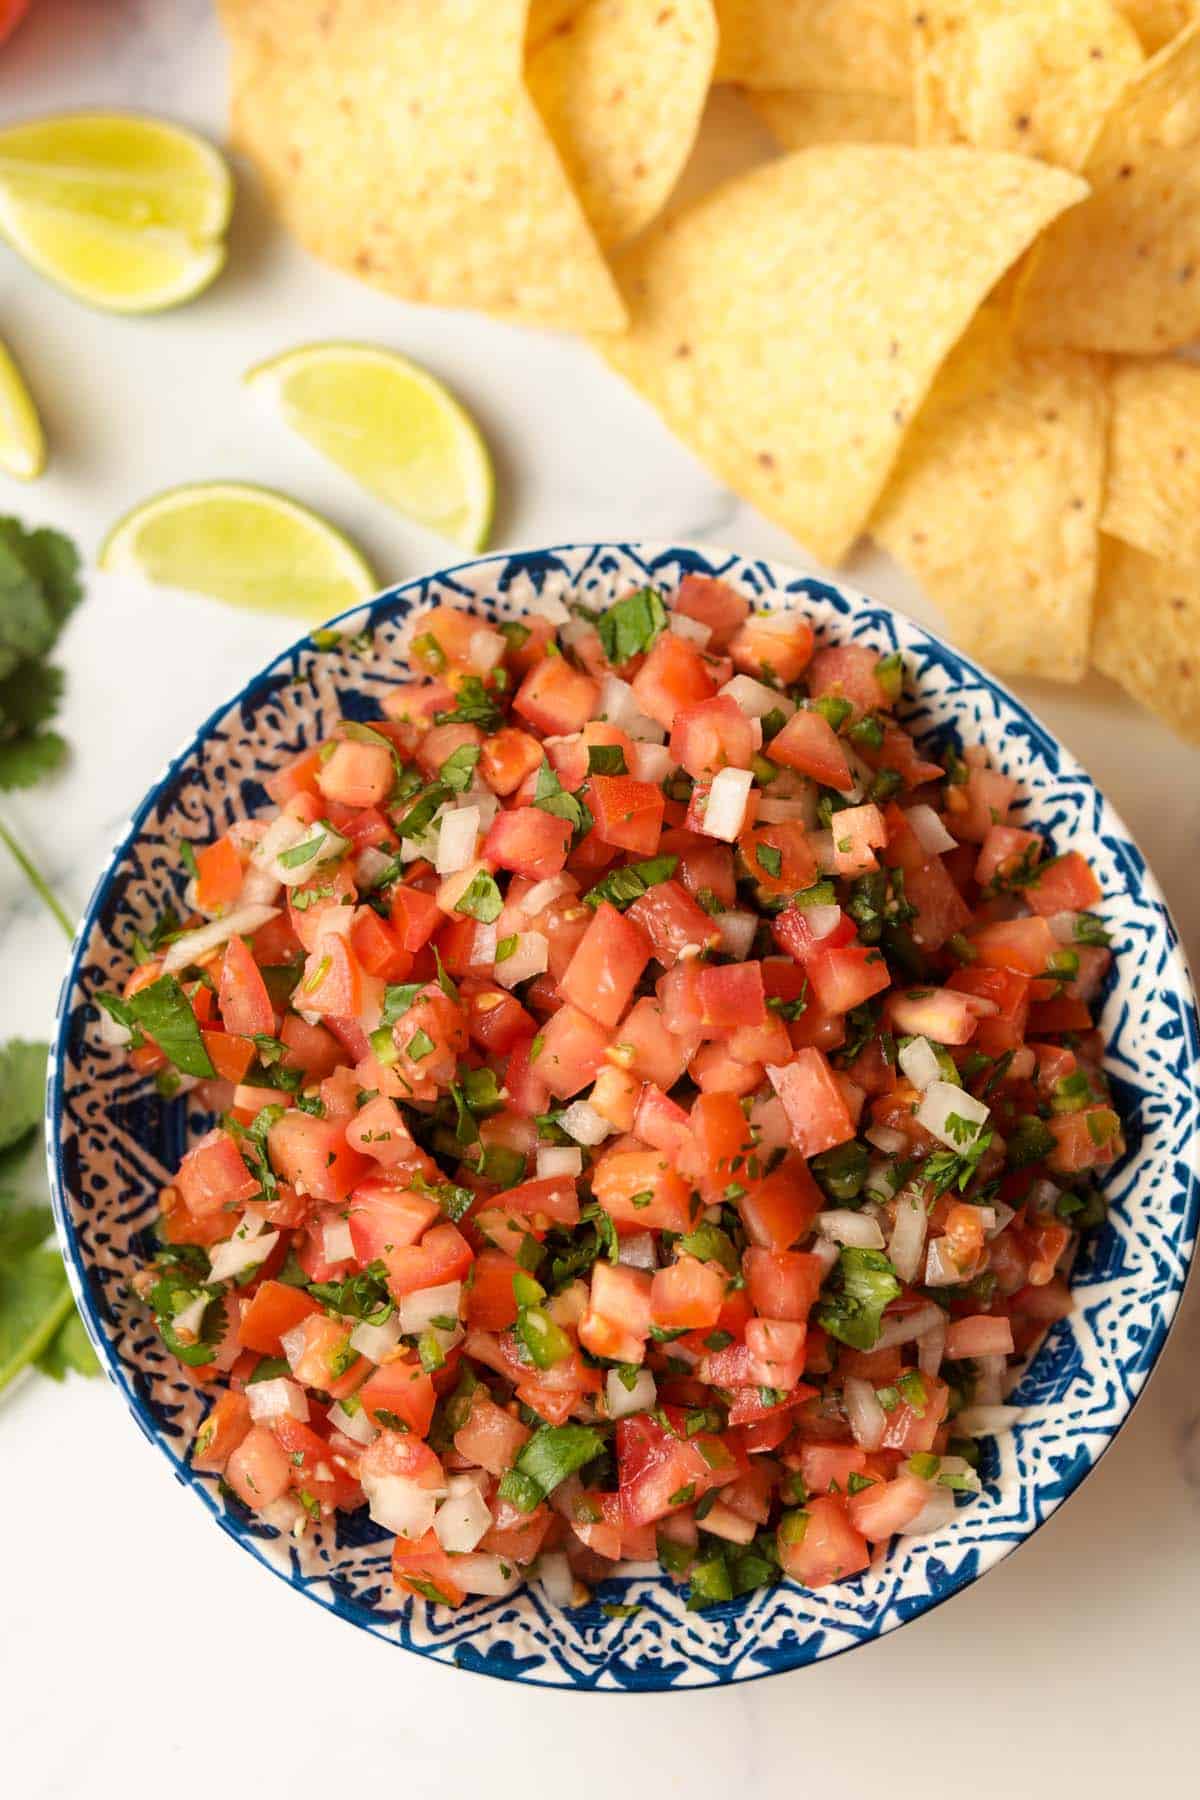 pico de gallo salsa in bowl with sliced limes, tortilla chips and cilantro in background.